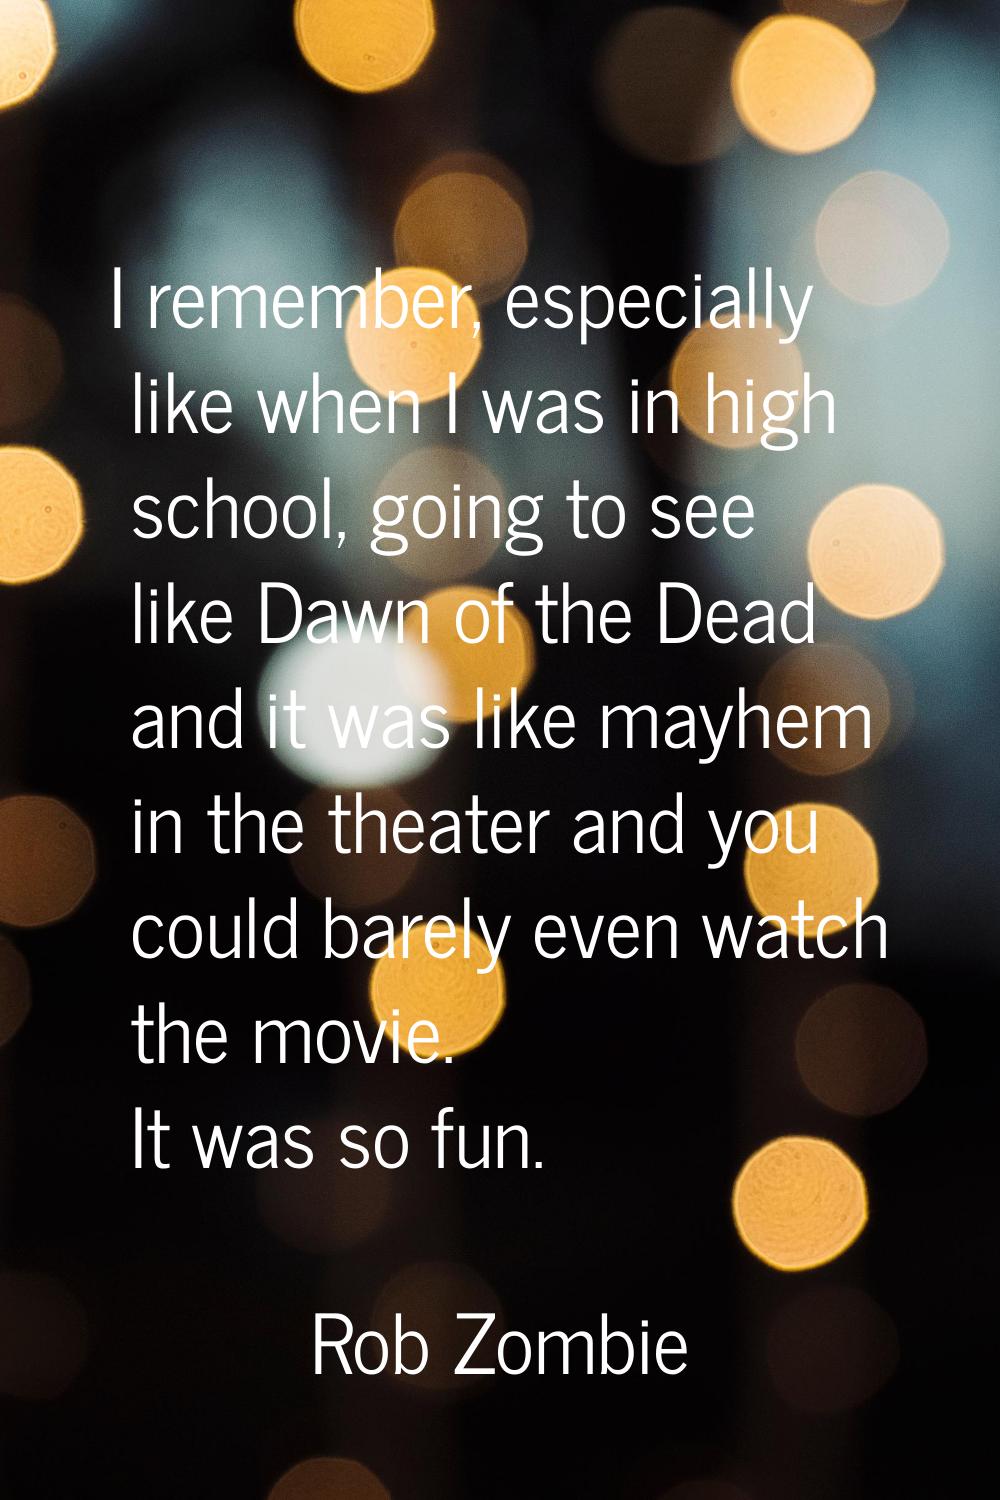 I remember, especially like when I was in high school, going to see like Dawn of the Dead and it wa